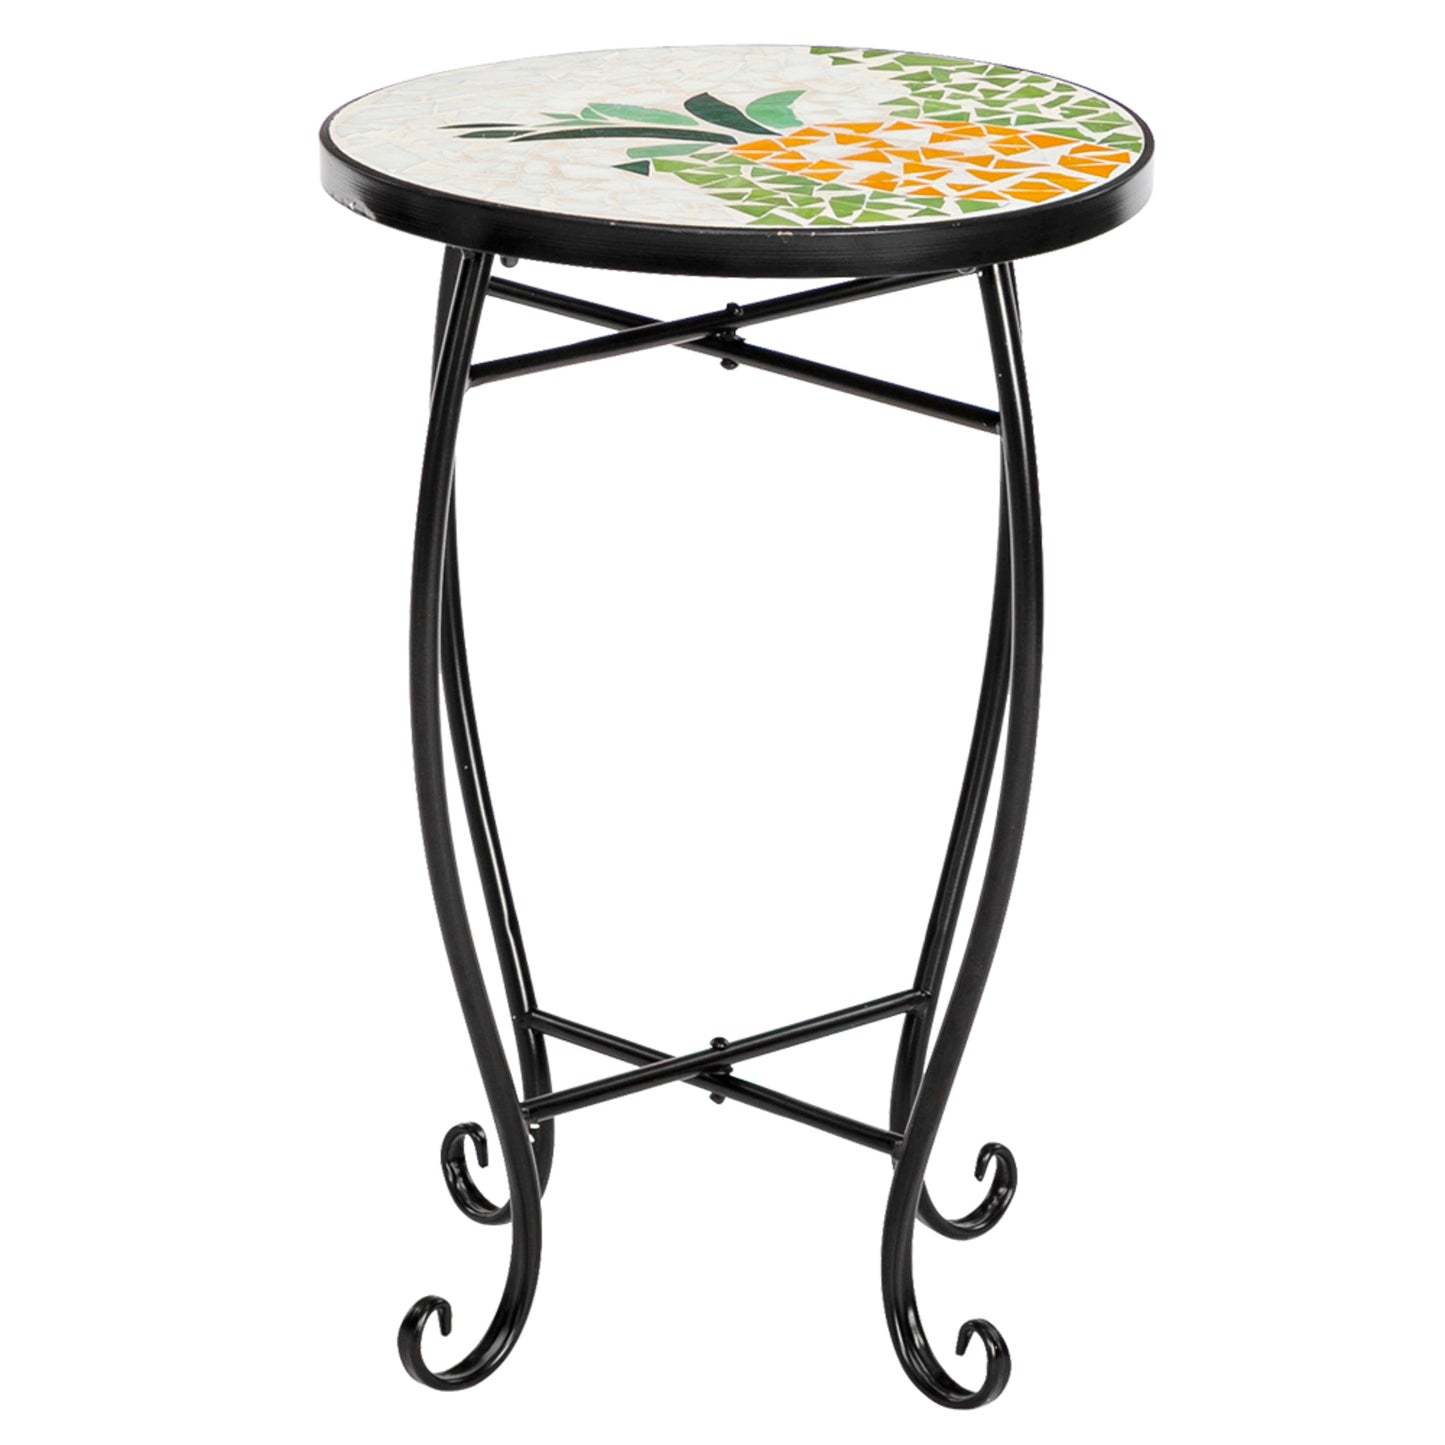 Inlaid Mosaic Round Terrace Bistro Tables Inlaid With Color Glass Pineapple Pattern